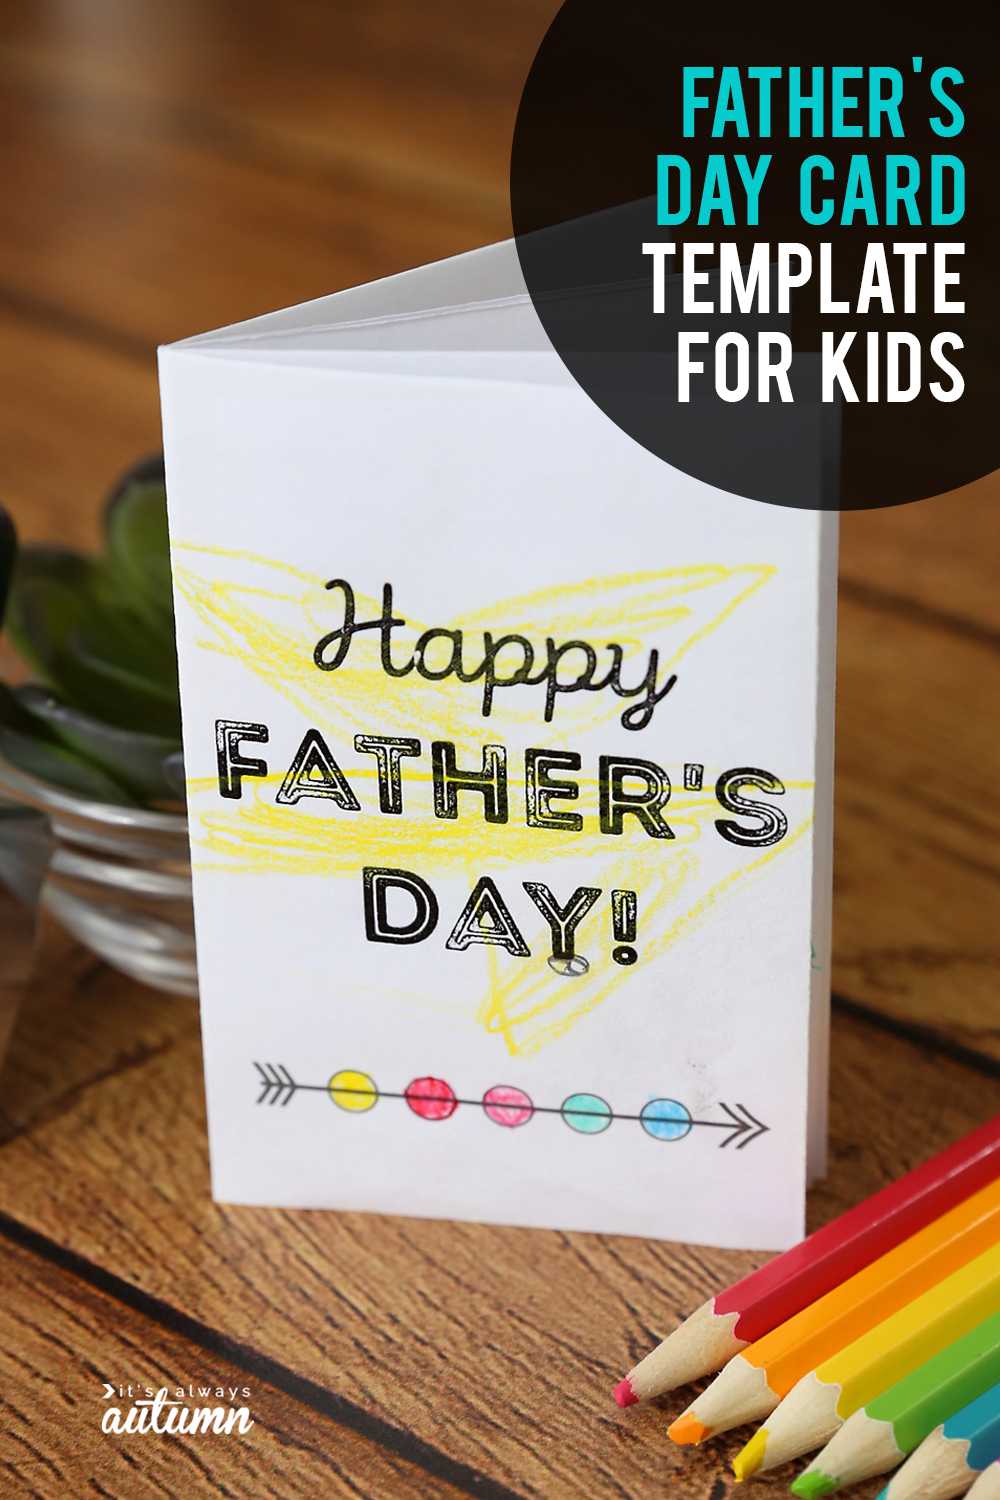 Adorable Printable Father's Day Card For Kids To Color With Regard To Fathers Day Card Template